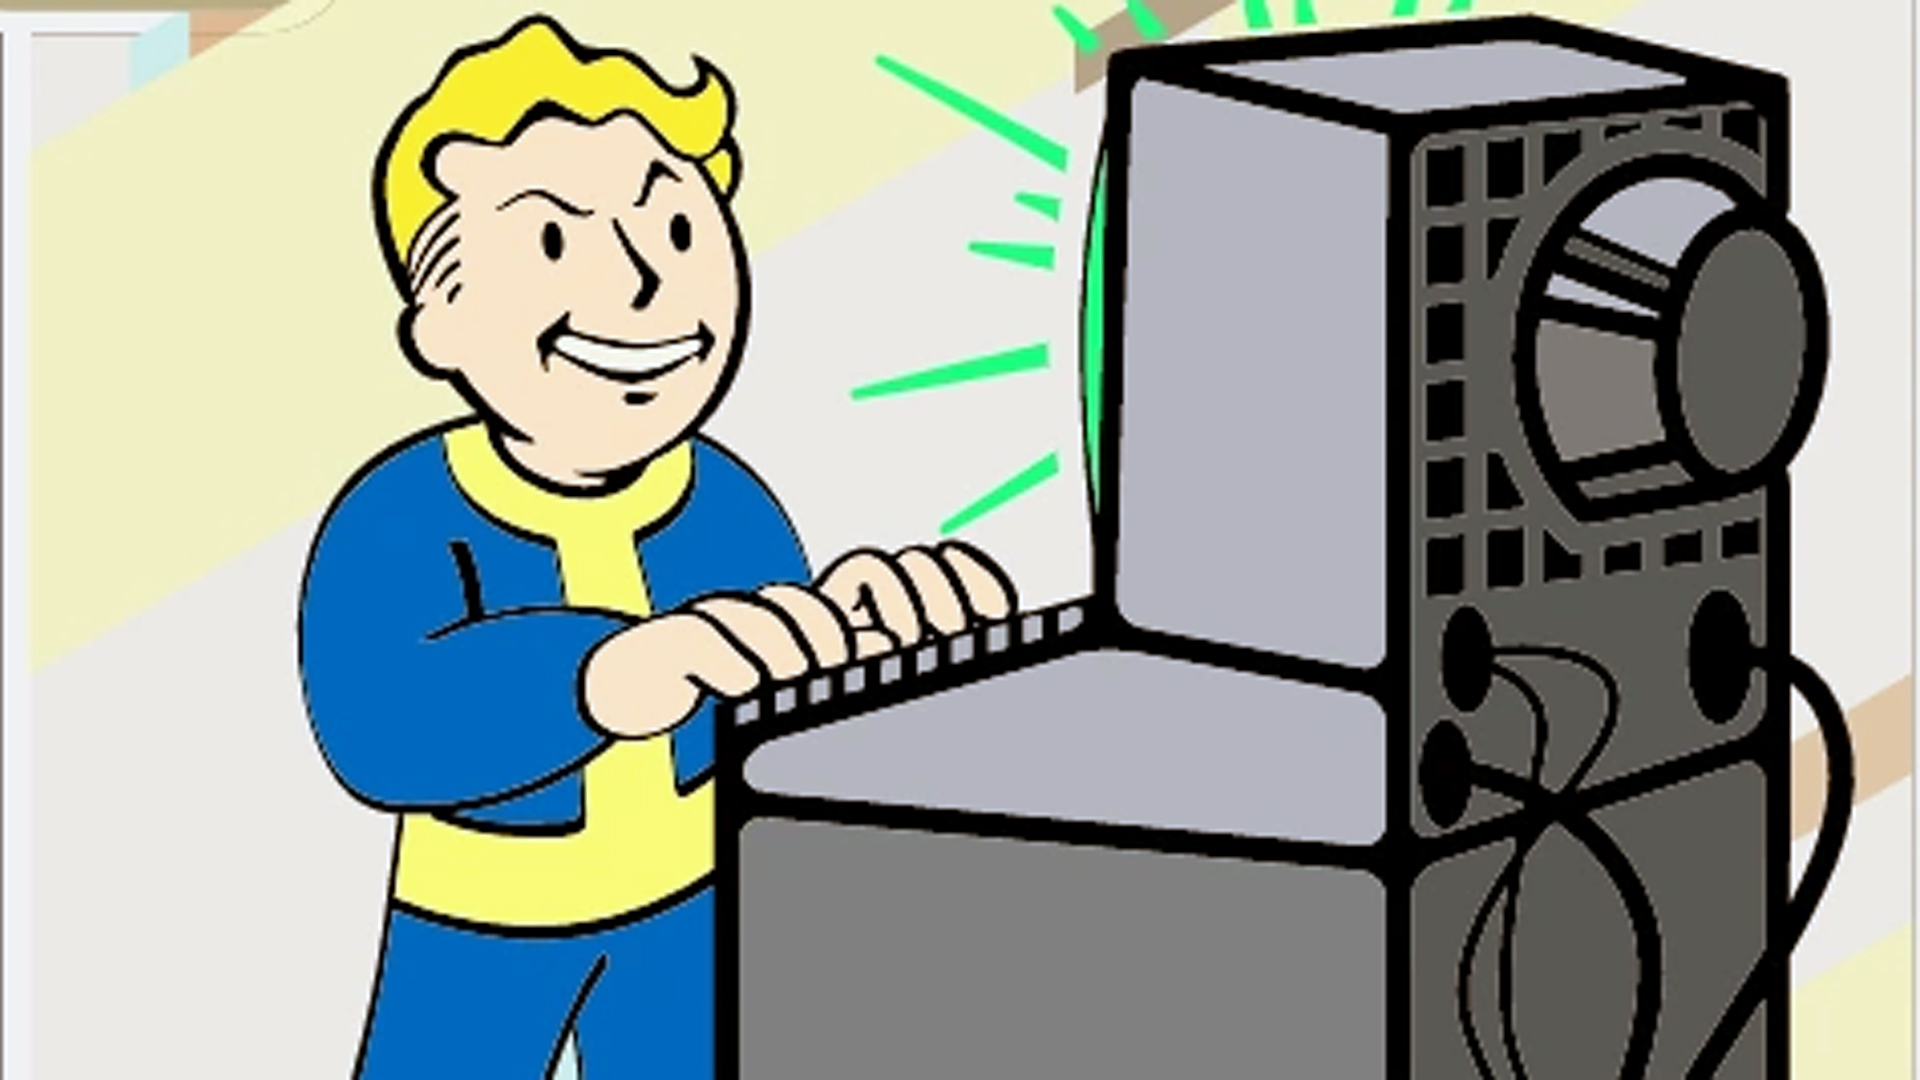 Bethesda Steam migration – here's how to transfer your games